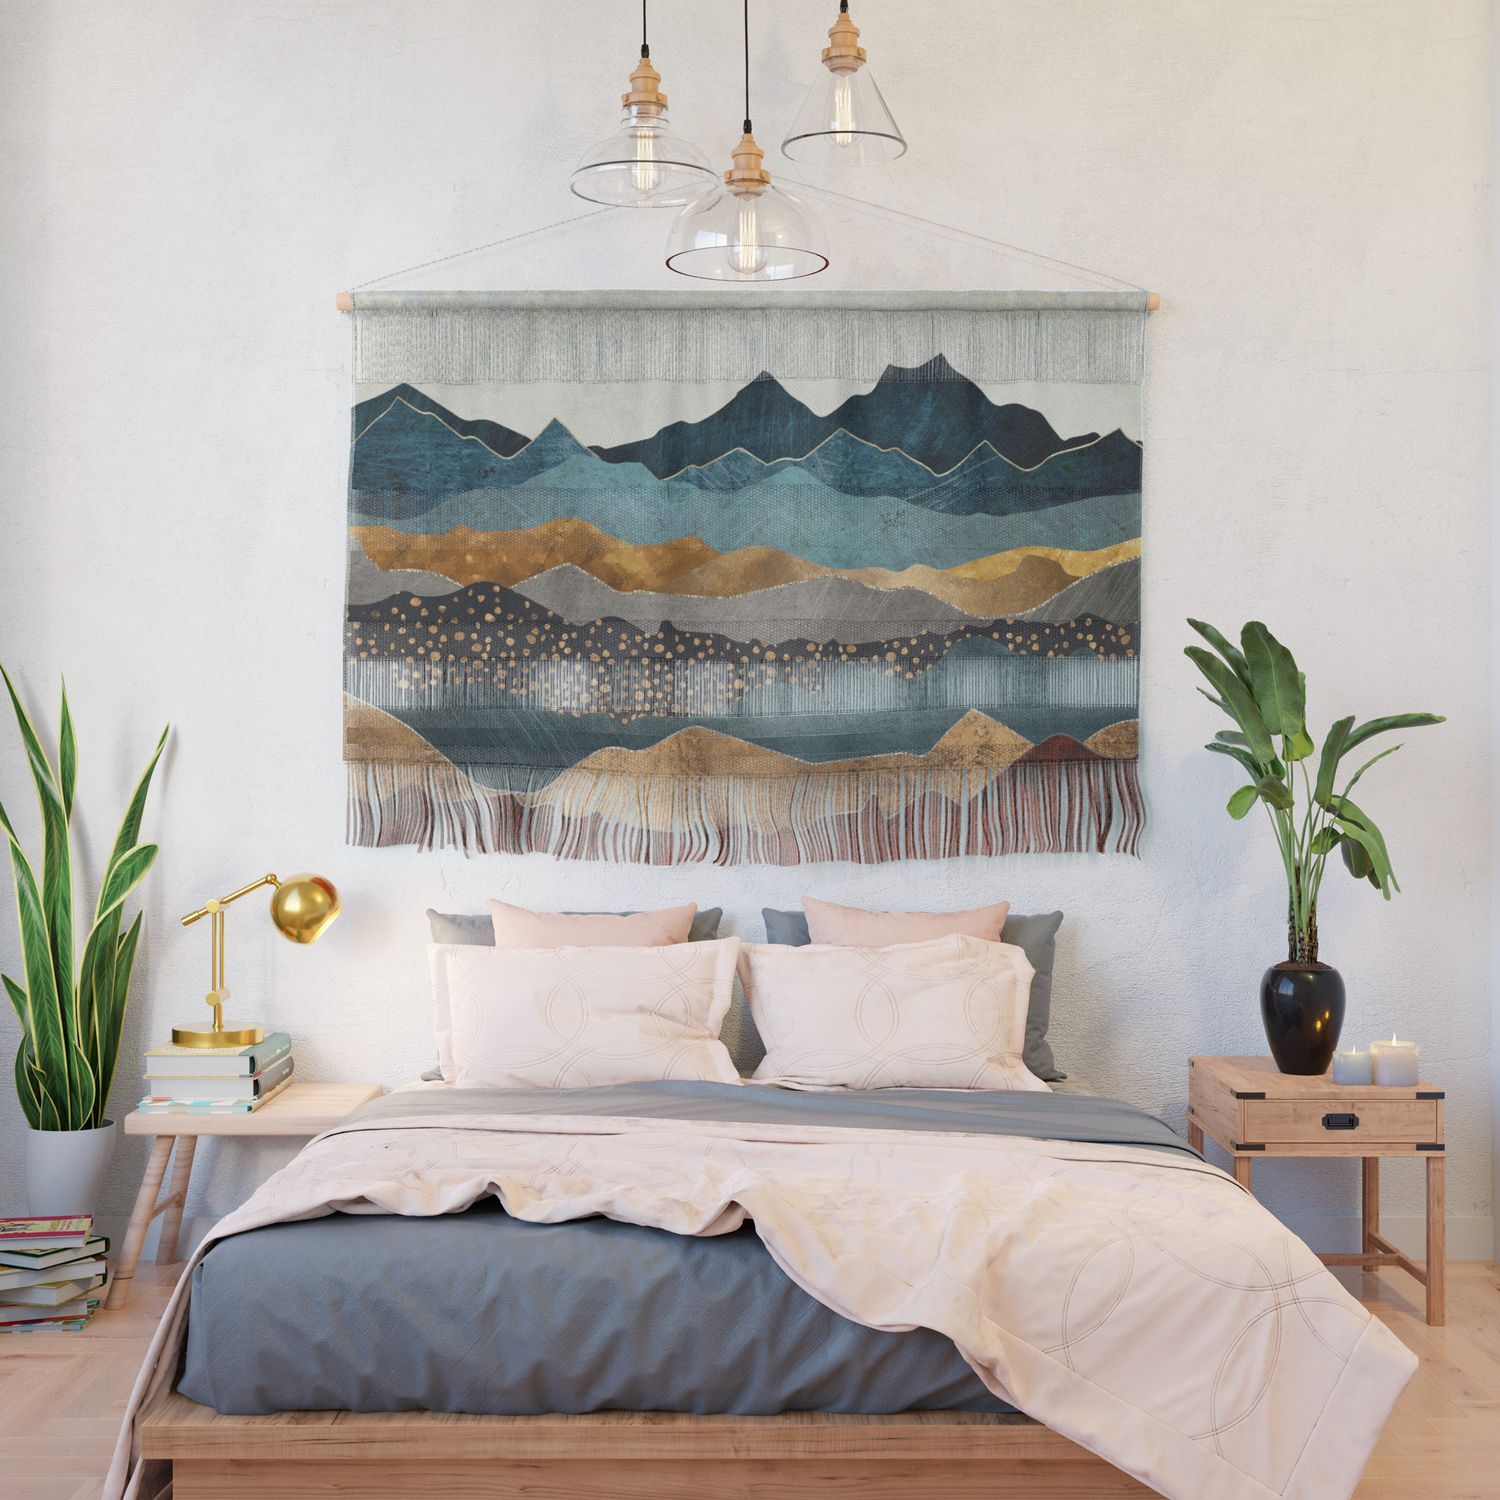 Amber Dusk Wall Hangingspacefrogdesigns | Society6 With Regard To Amber Dusk Wood Wall Art (View 12 of 15)